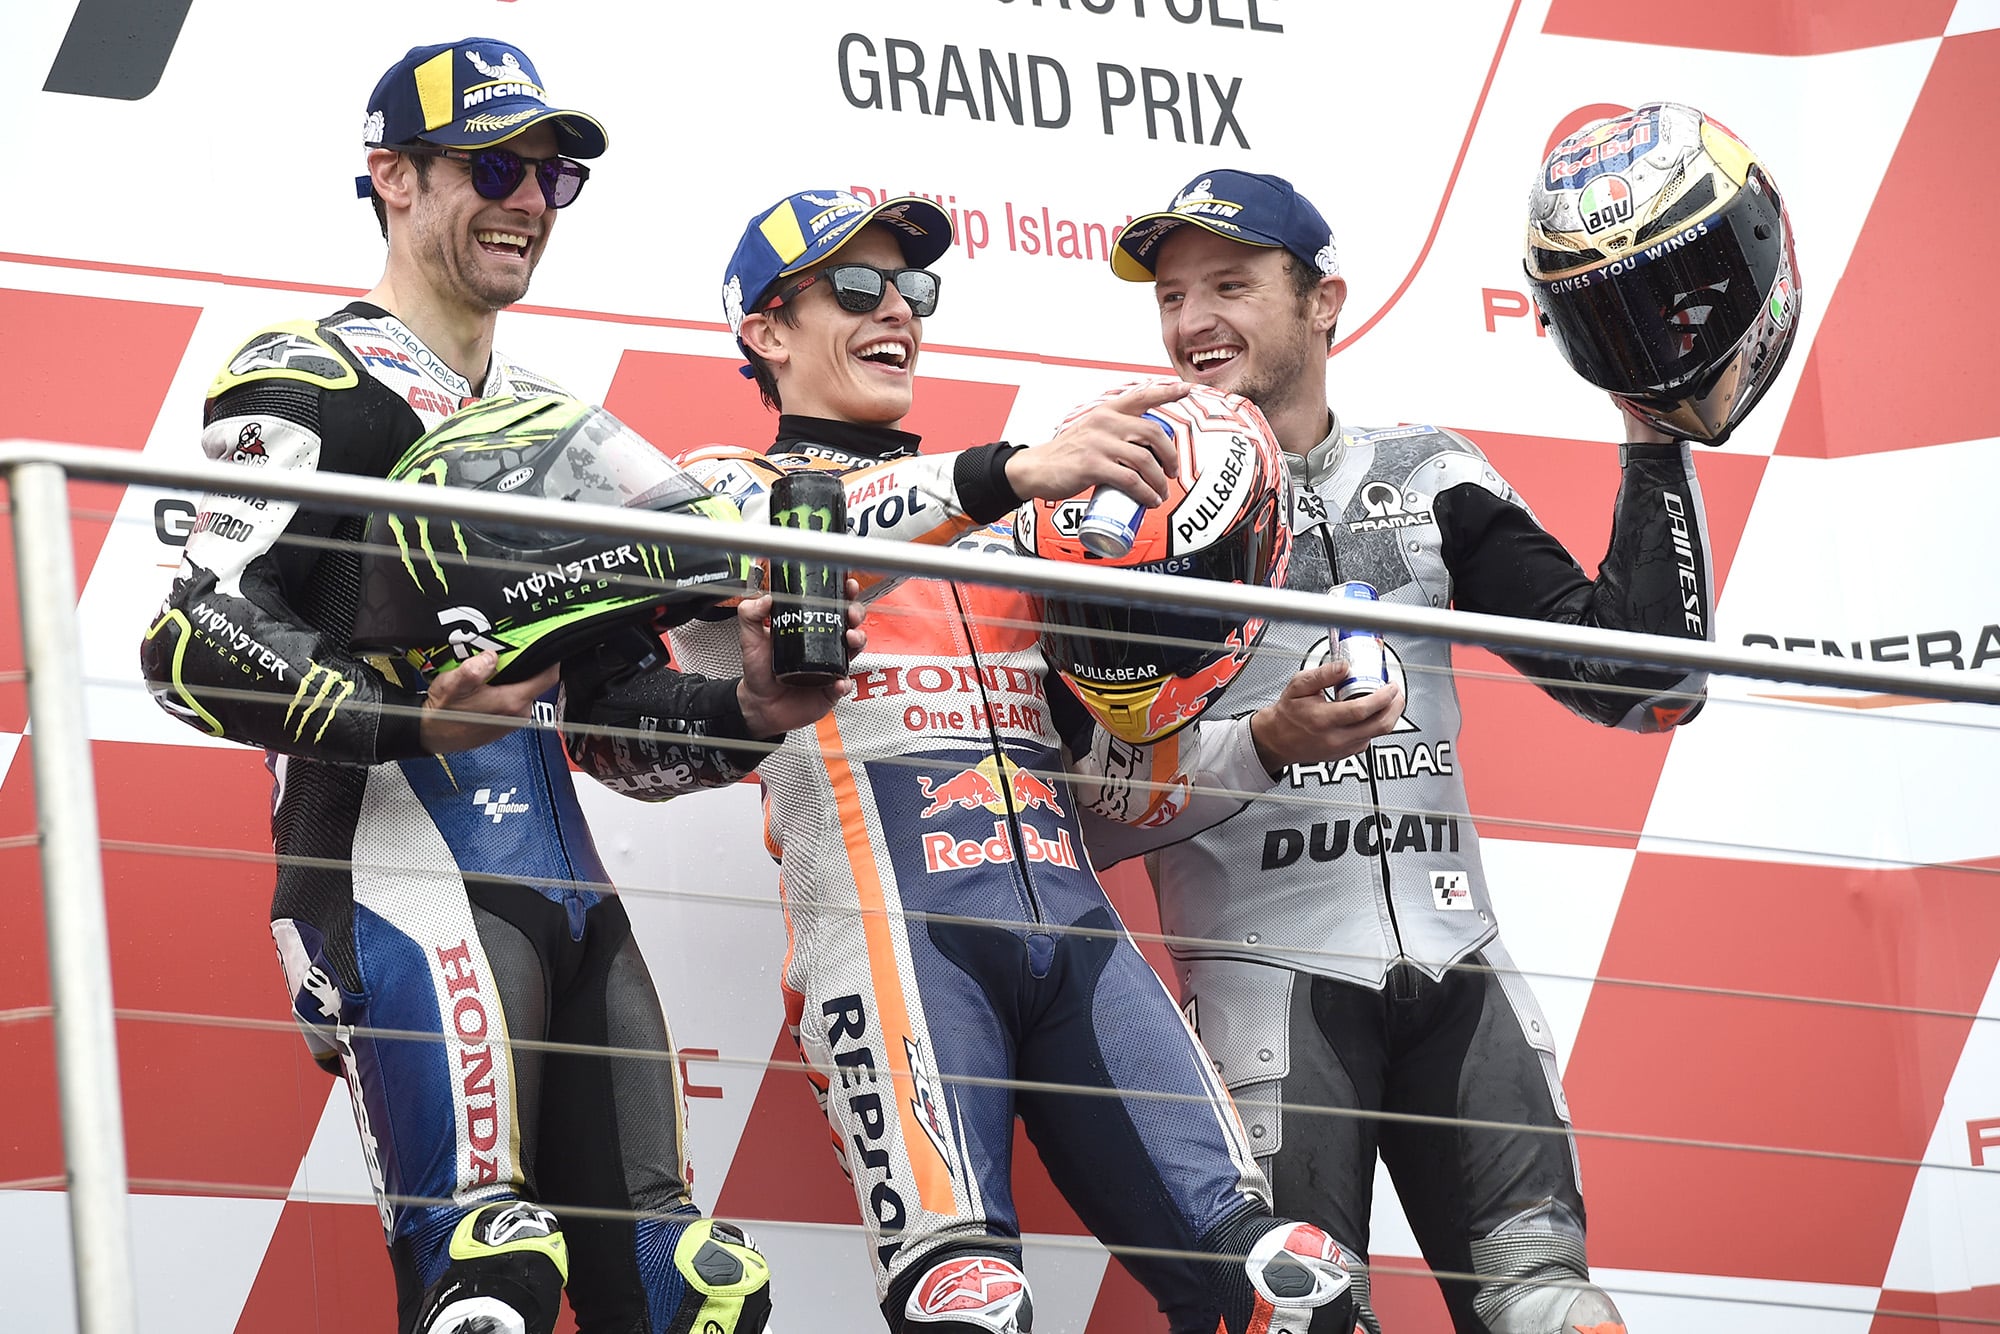 Marc Marquez, Cal Crutchlow and Jack Miller on the podium at Phillip Island